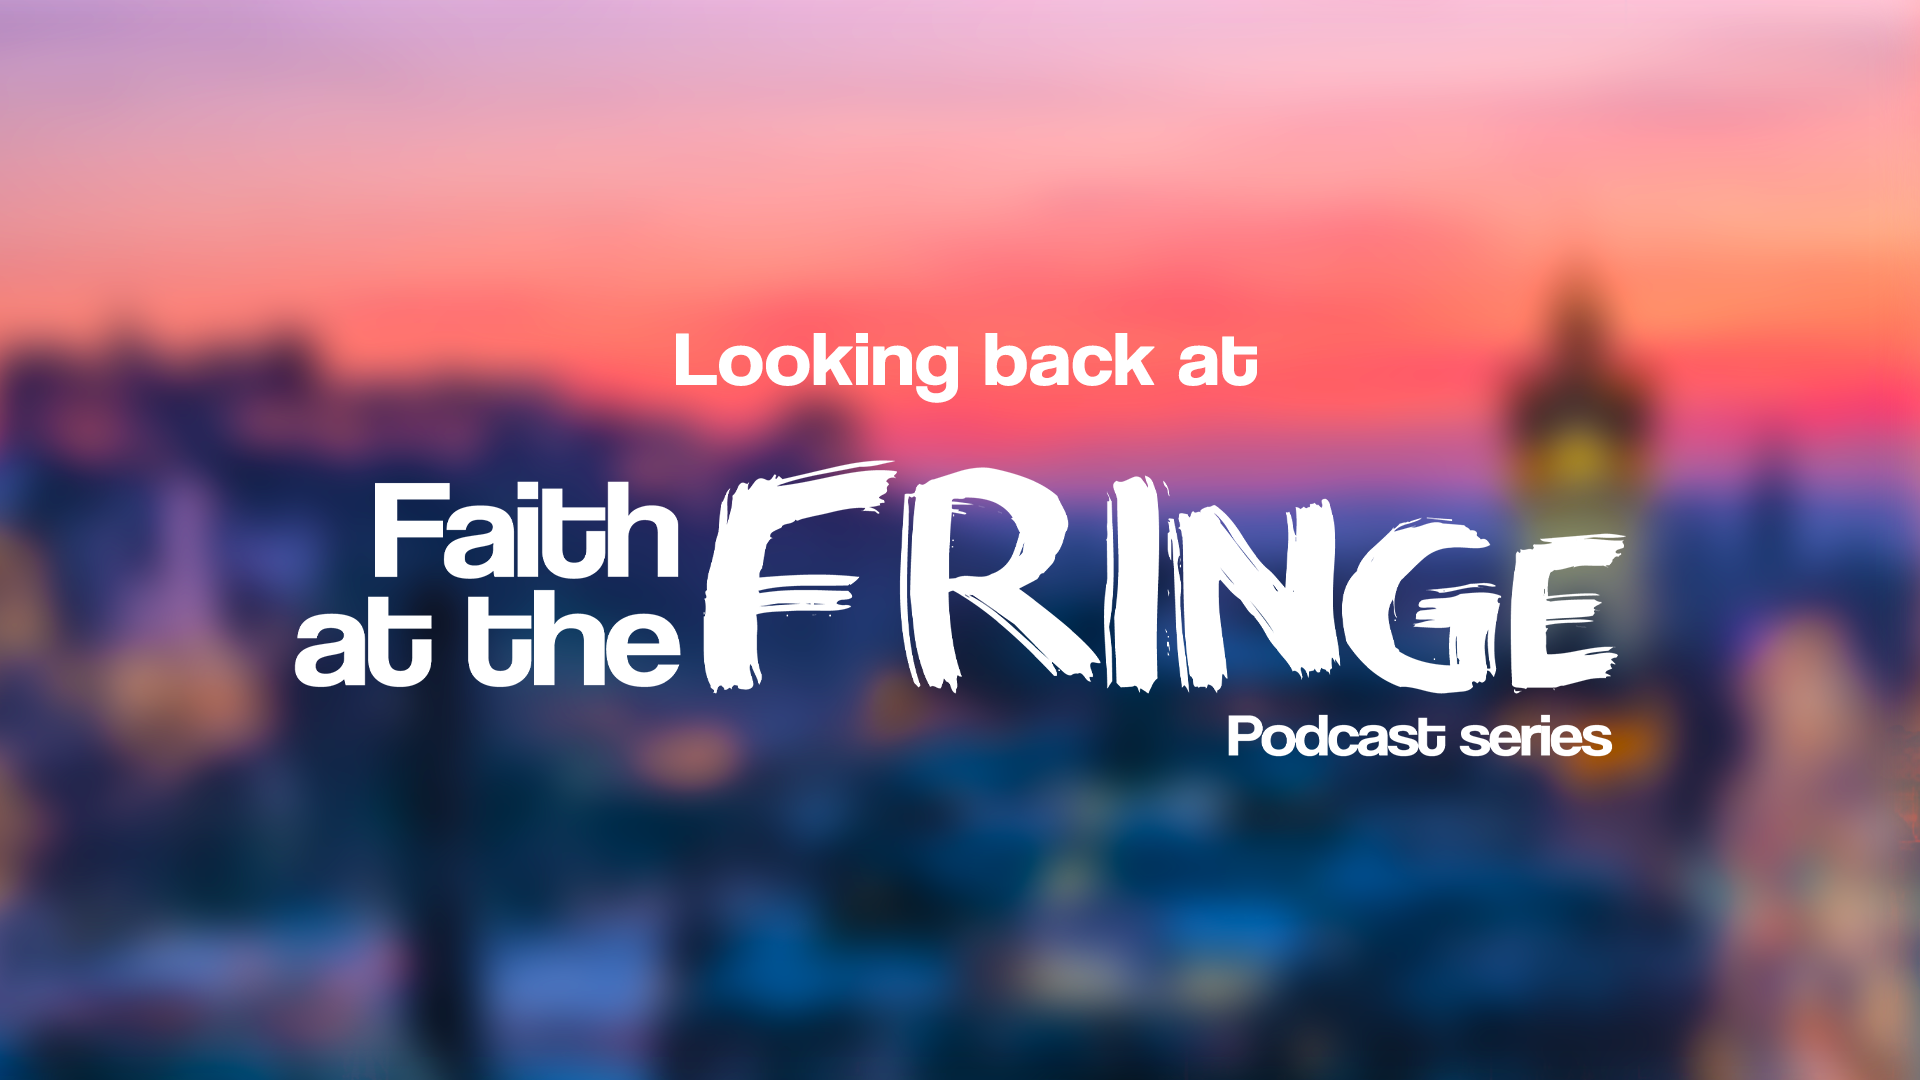 Looking Back at Faith at the Fringe